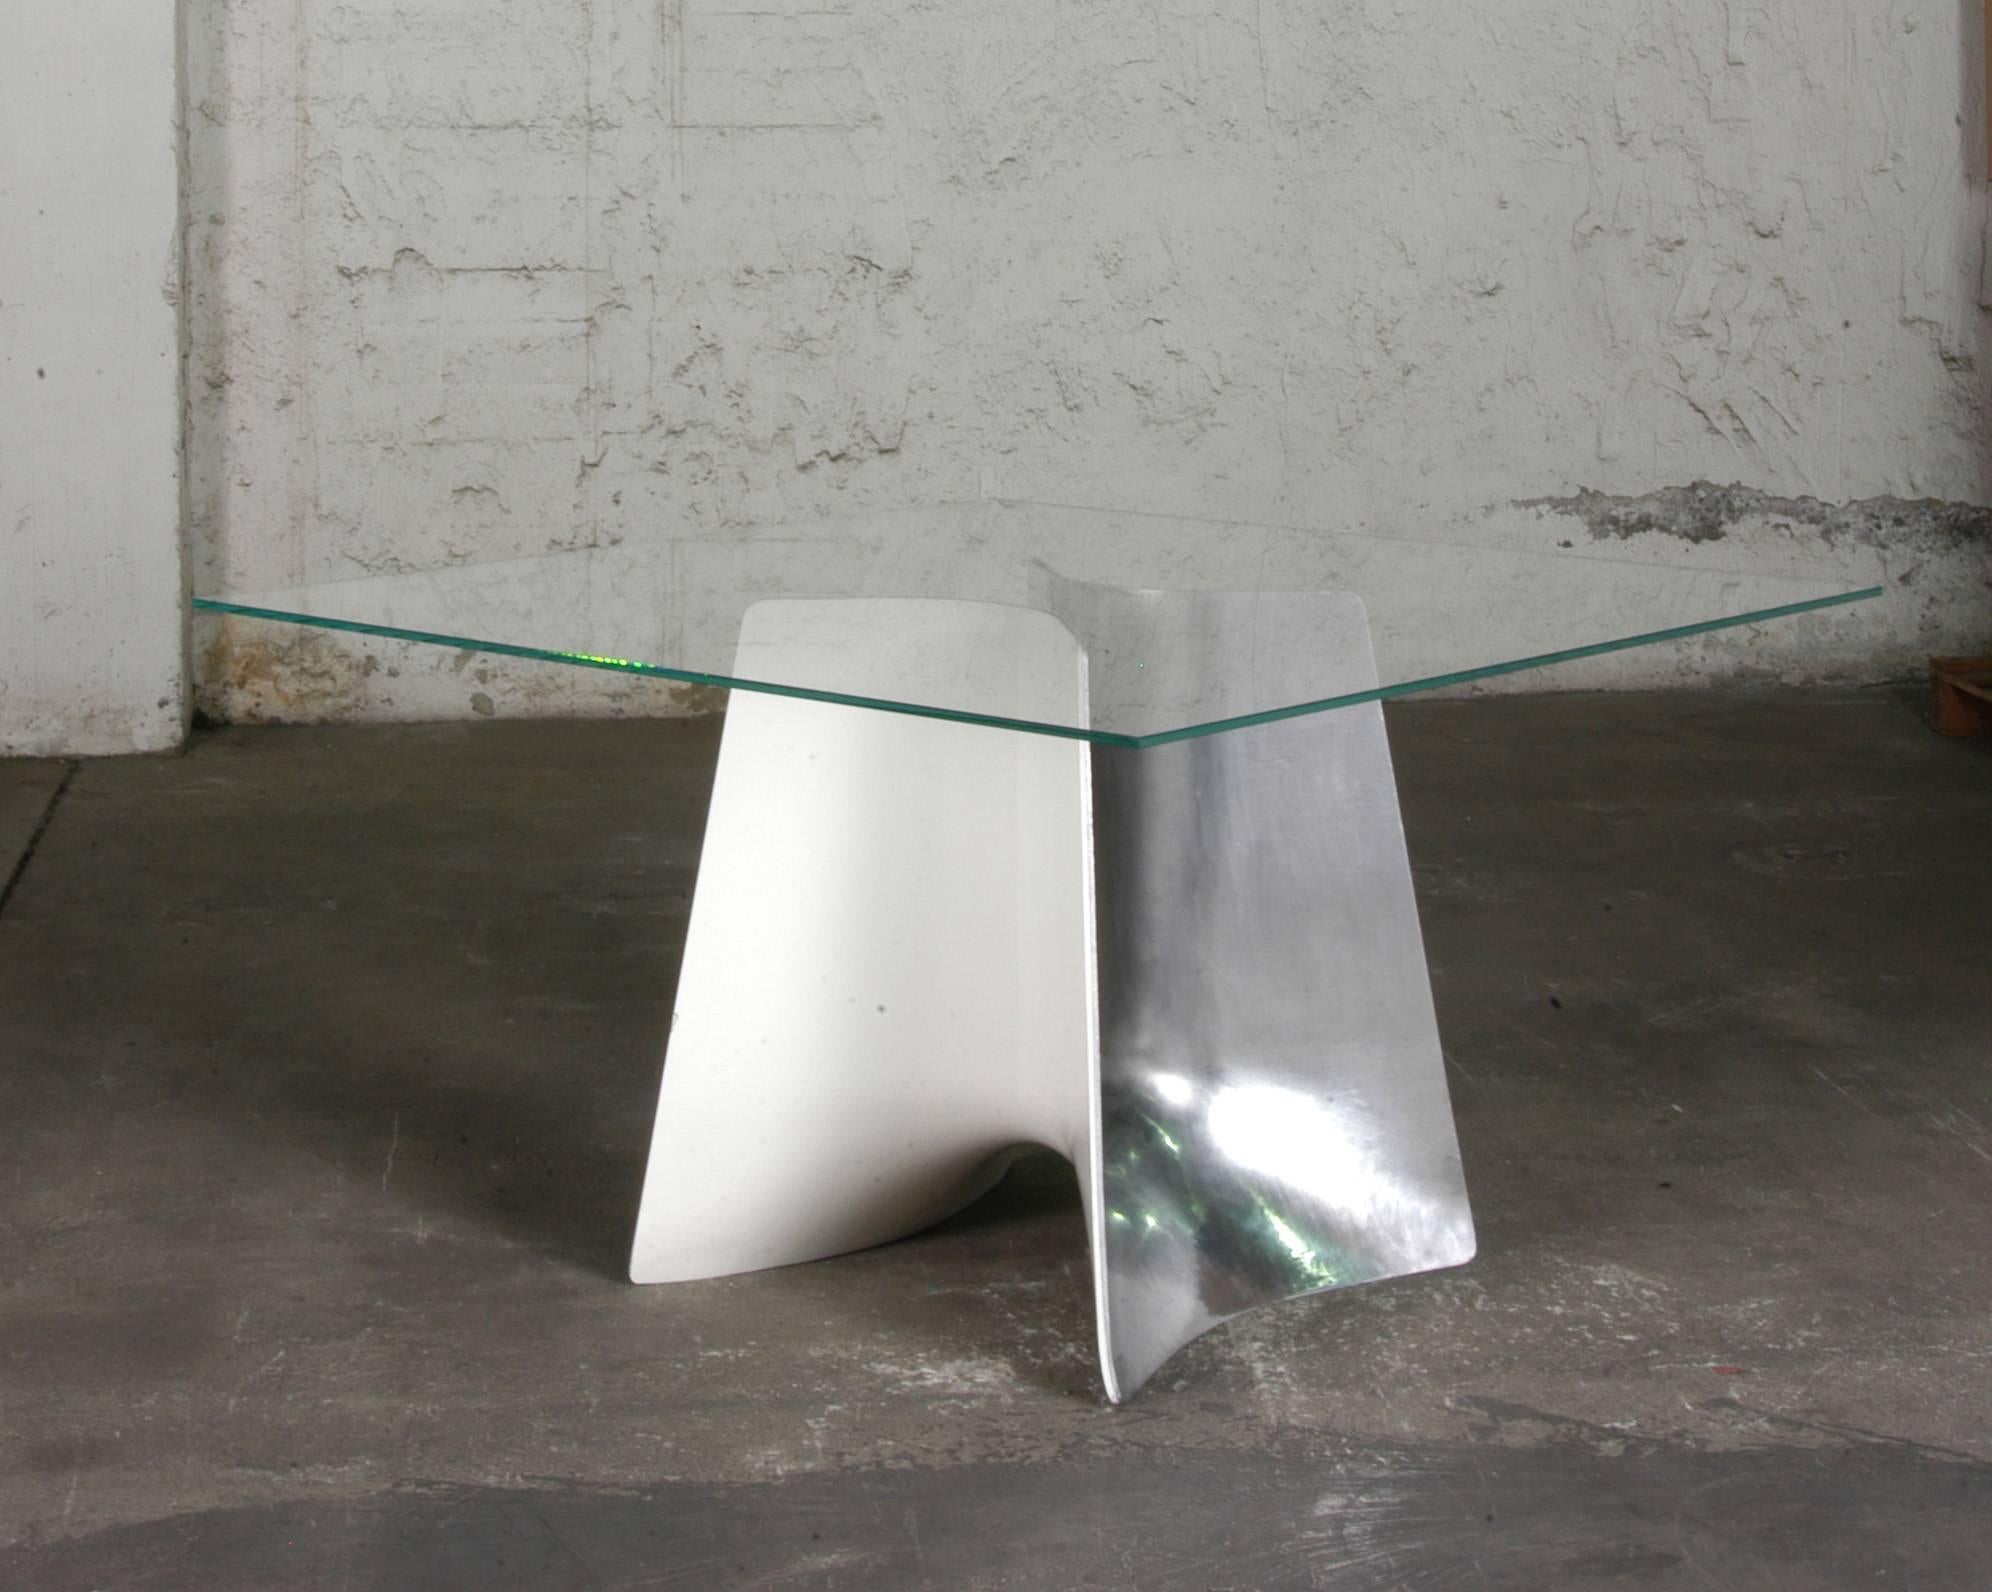 Bentz High Square Aluminum Table W/ Glass Top by Jeff Miller In New Condition For Sale In Milan, IT